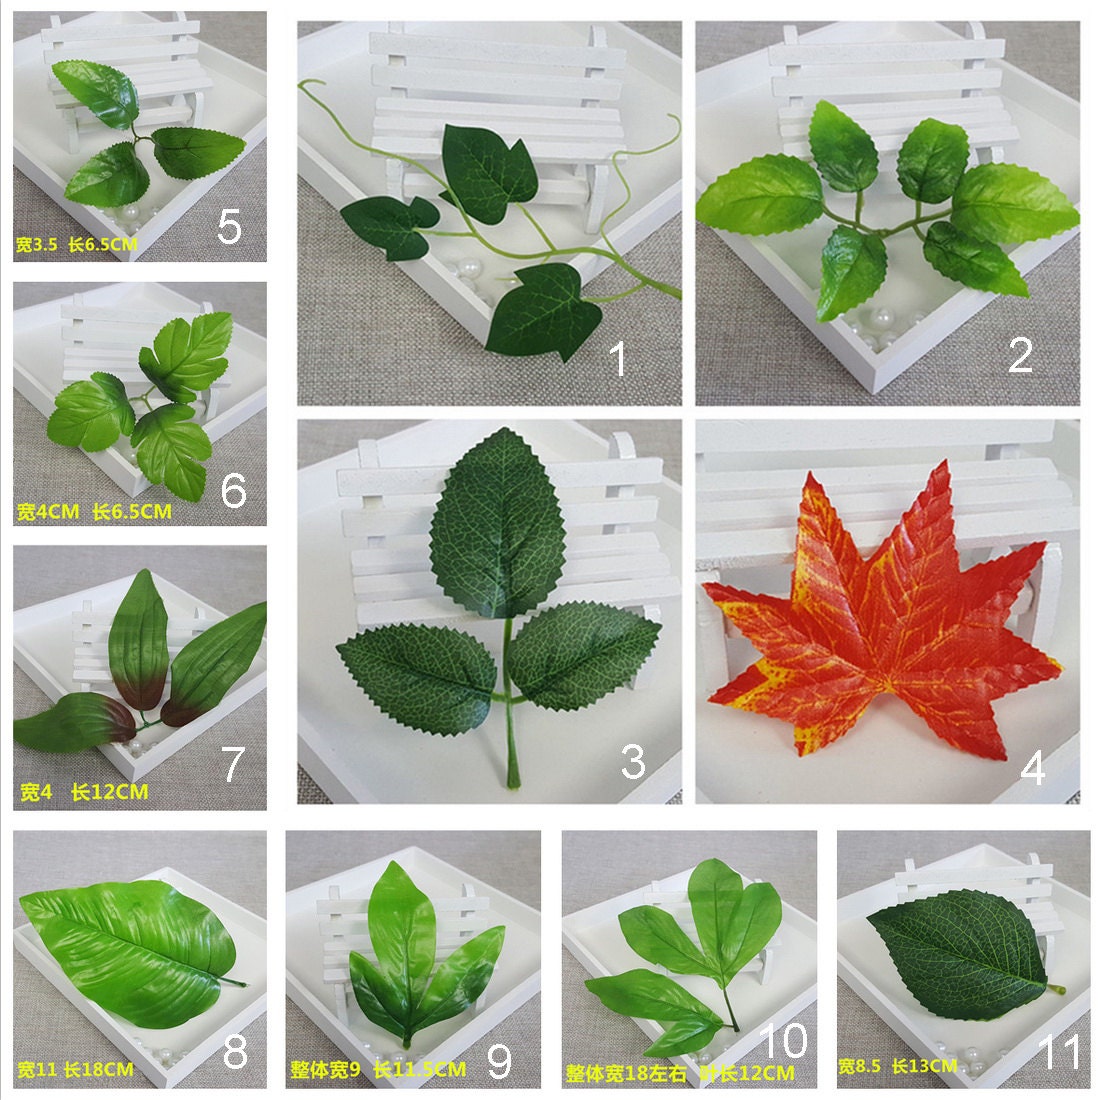 Details about   10x Artificial Fake Leaf Plant Rose Green Leaves Wedding Party Xmas Home Decor 